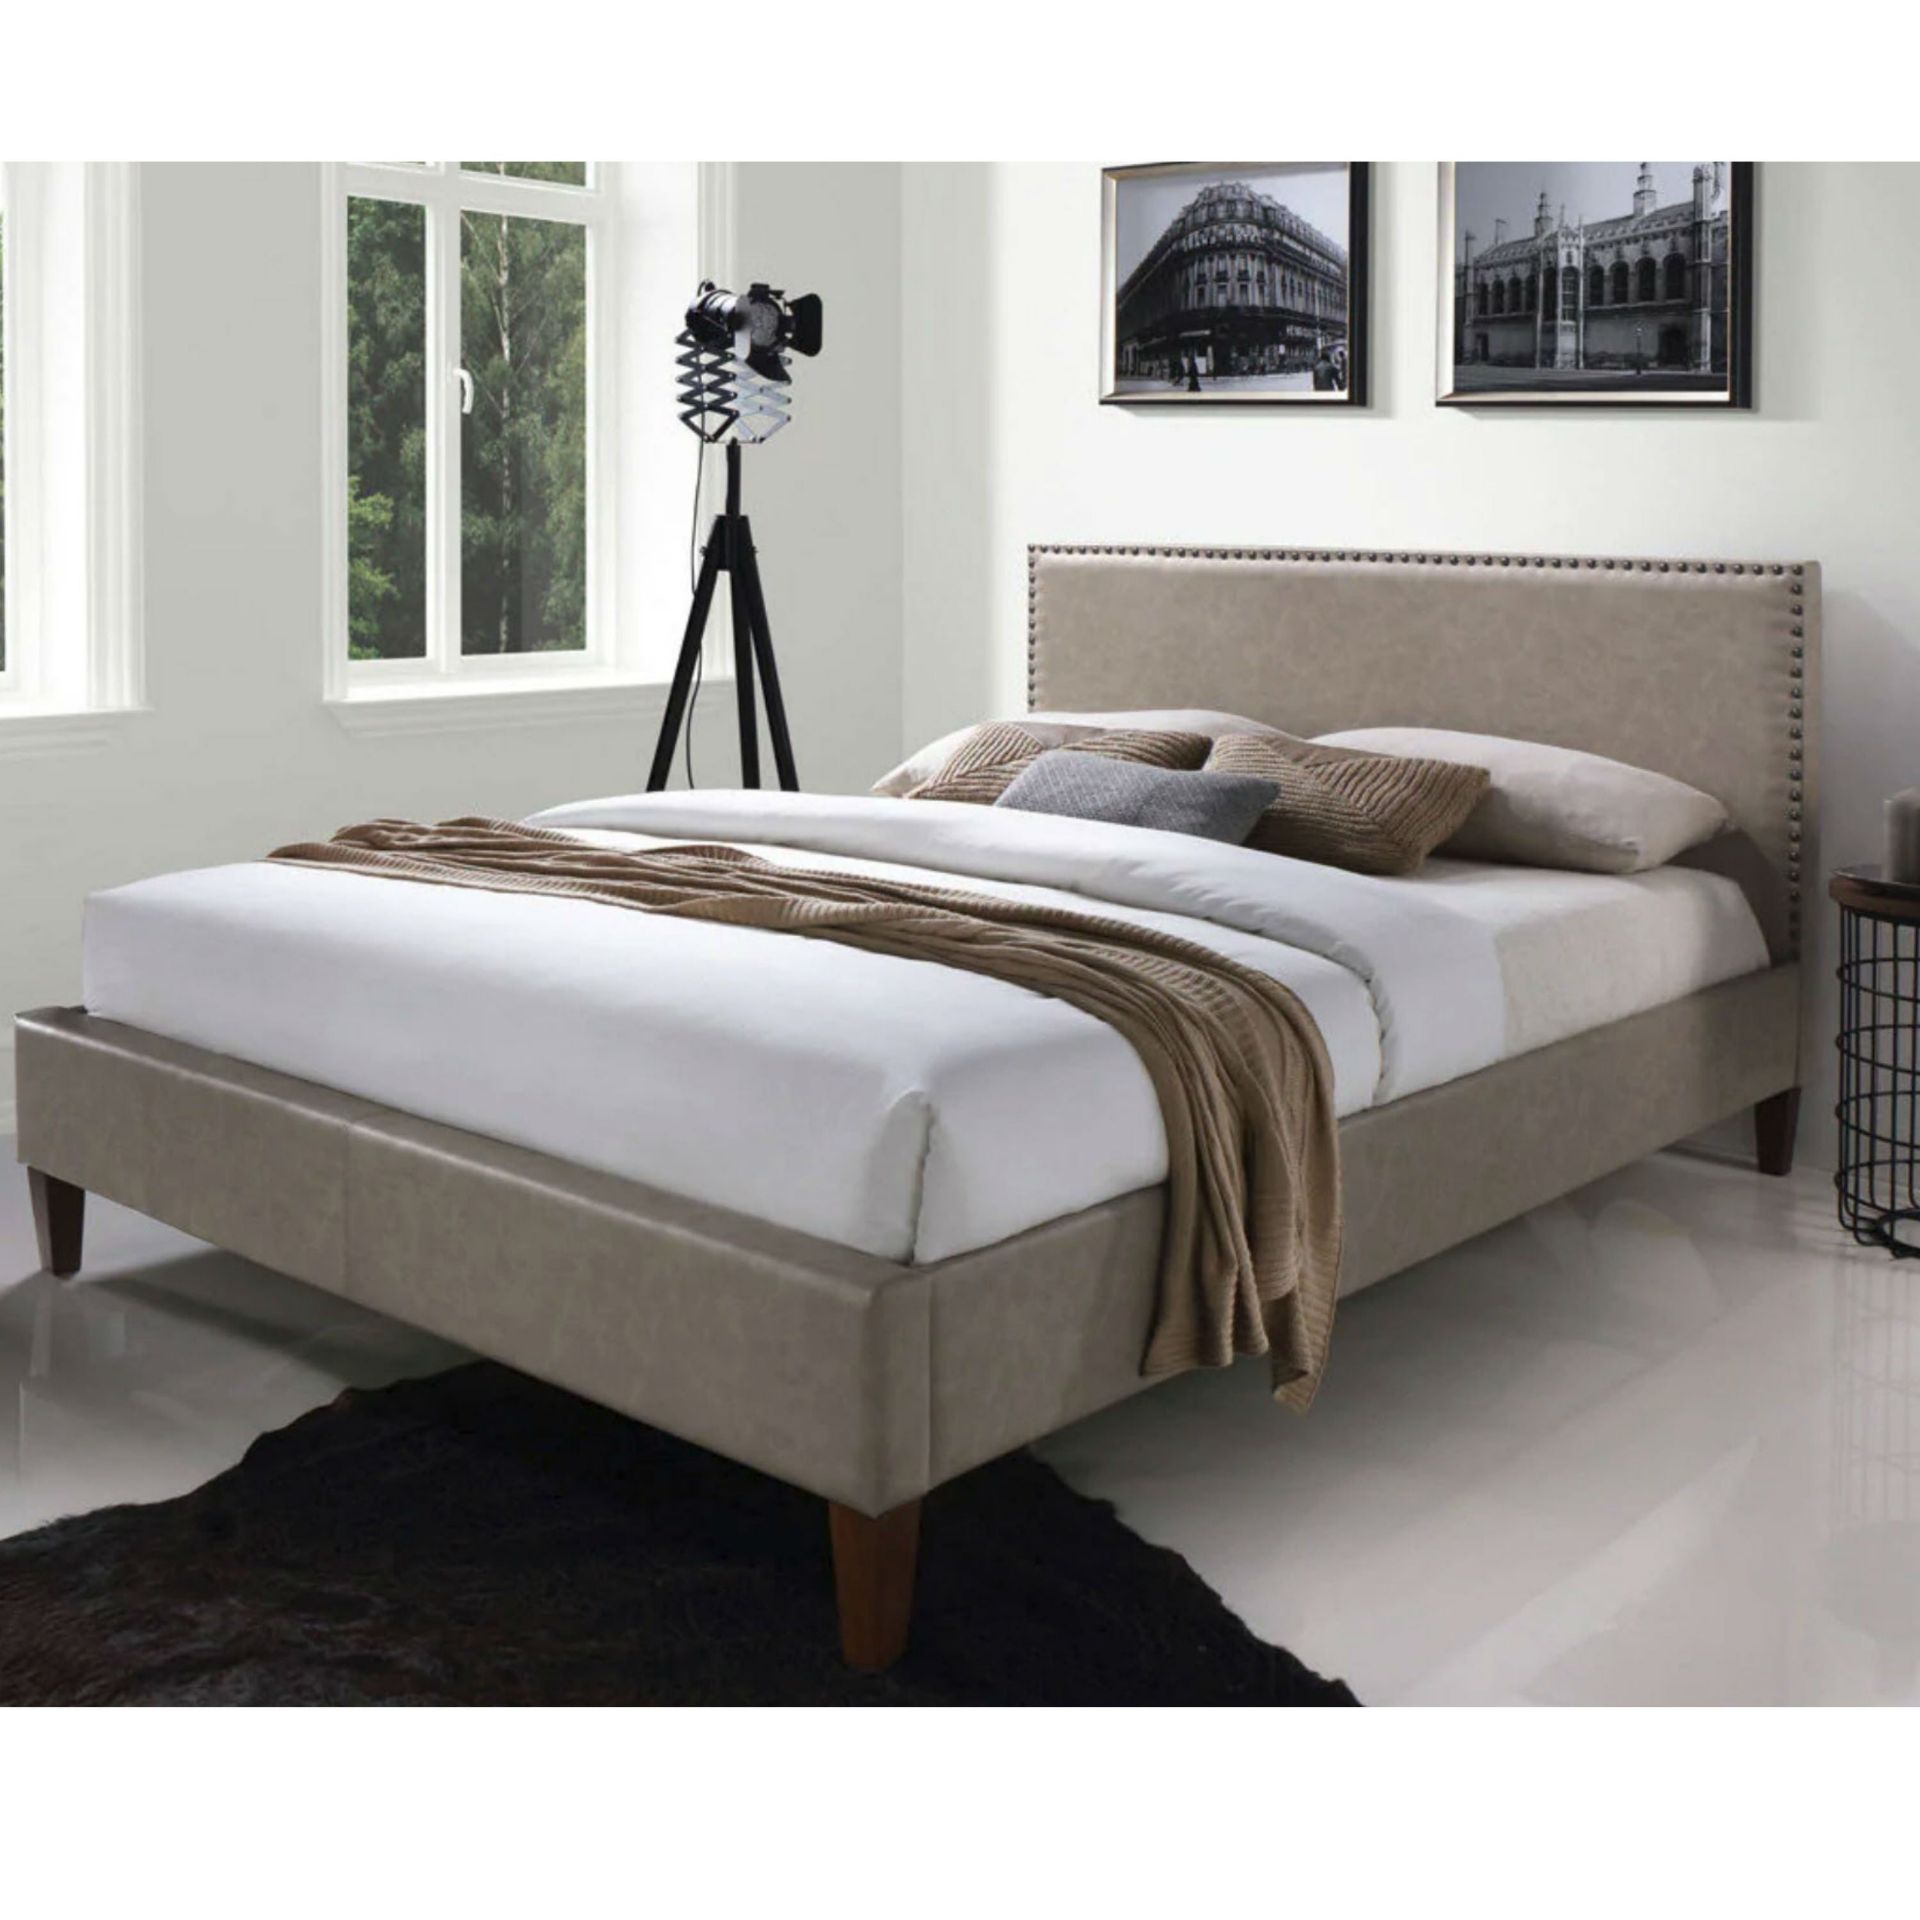 Boxed Edward Queen Kingsize Bed In Beige RRP £500 (Sourced From A High End Furniture Wholesalers)